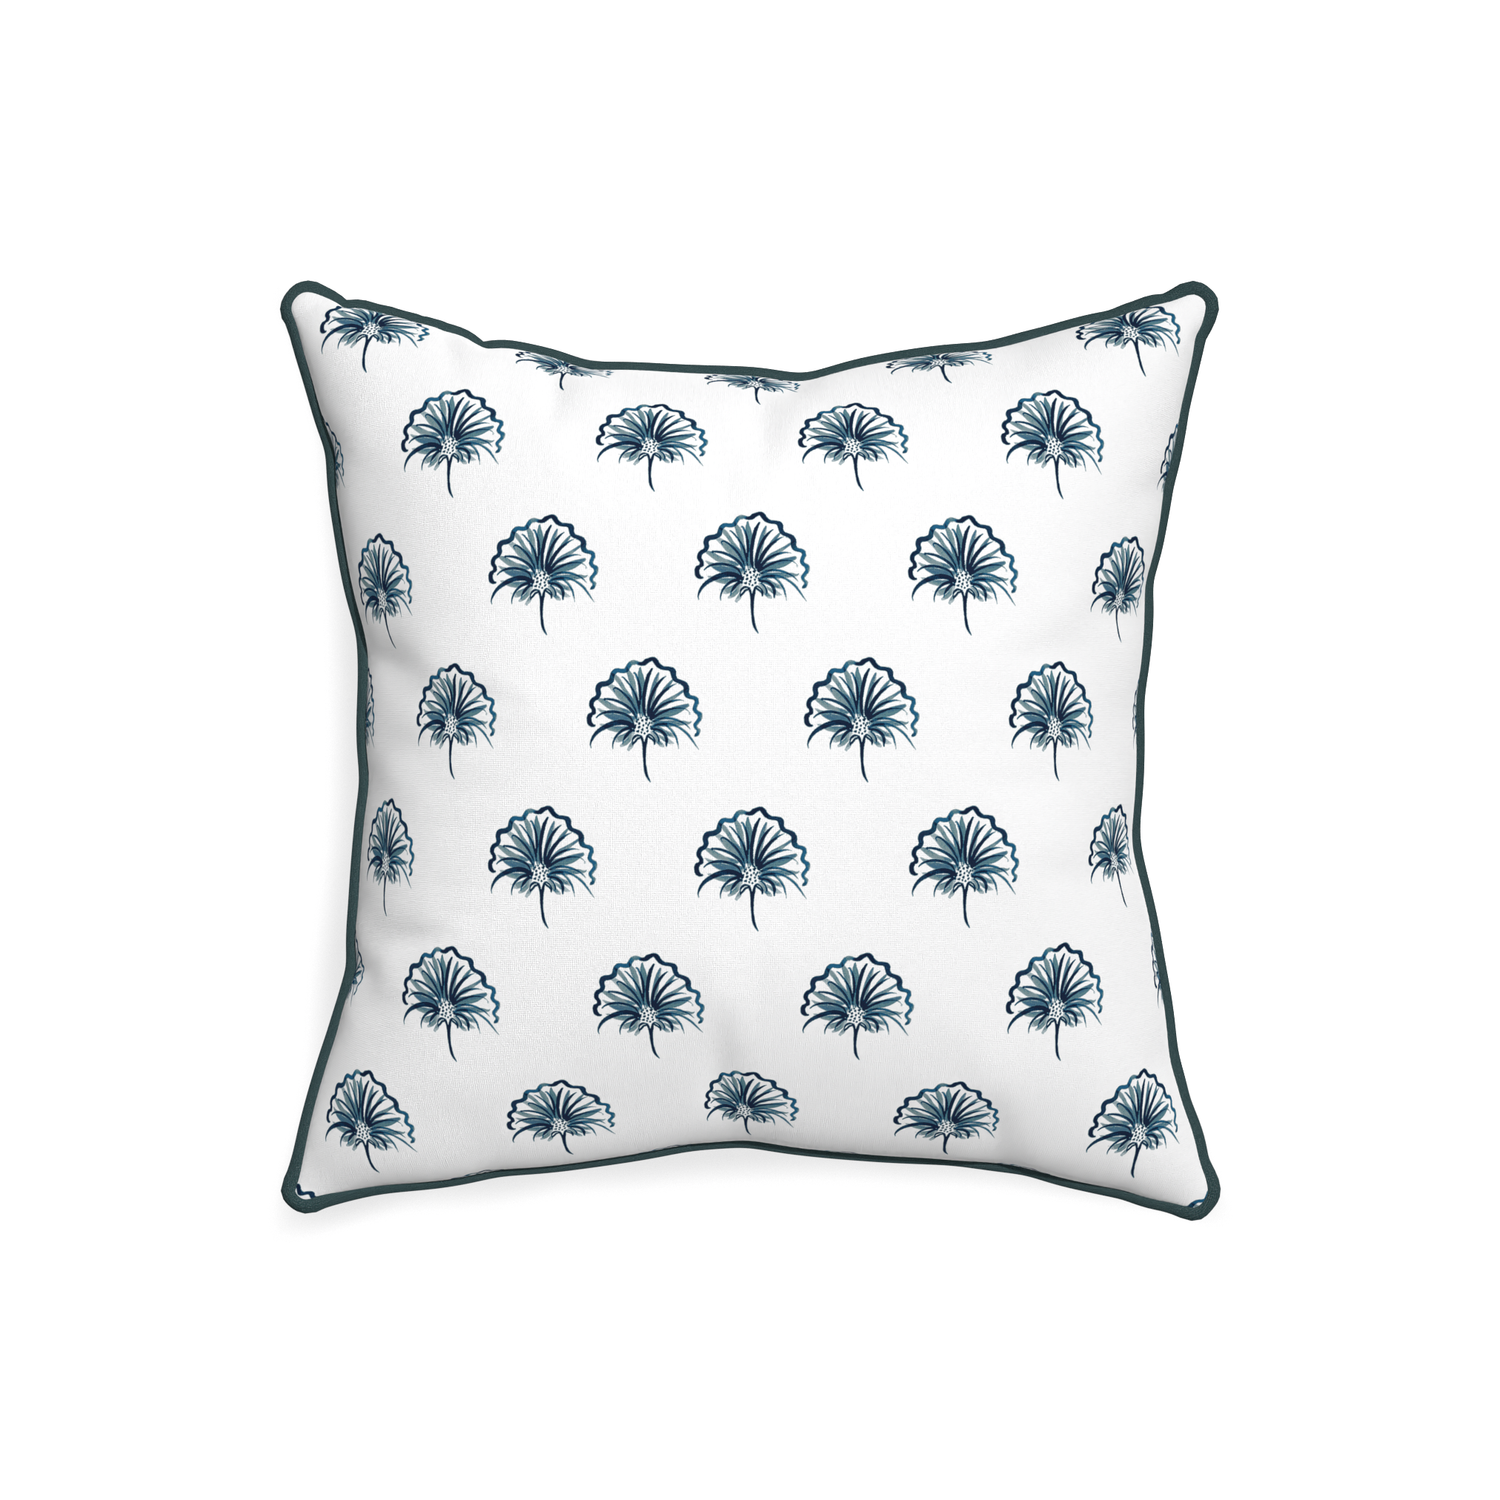 20-square penelope midnight custom floral navypillow with p piping on white background